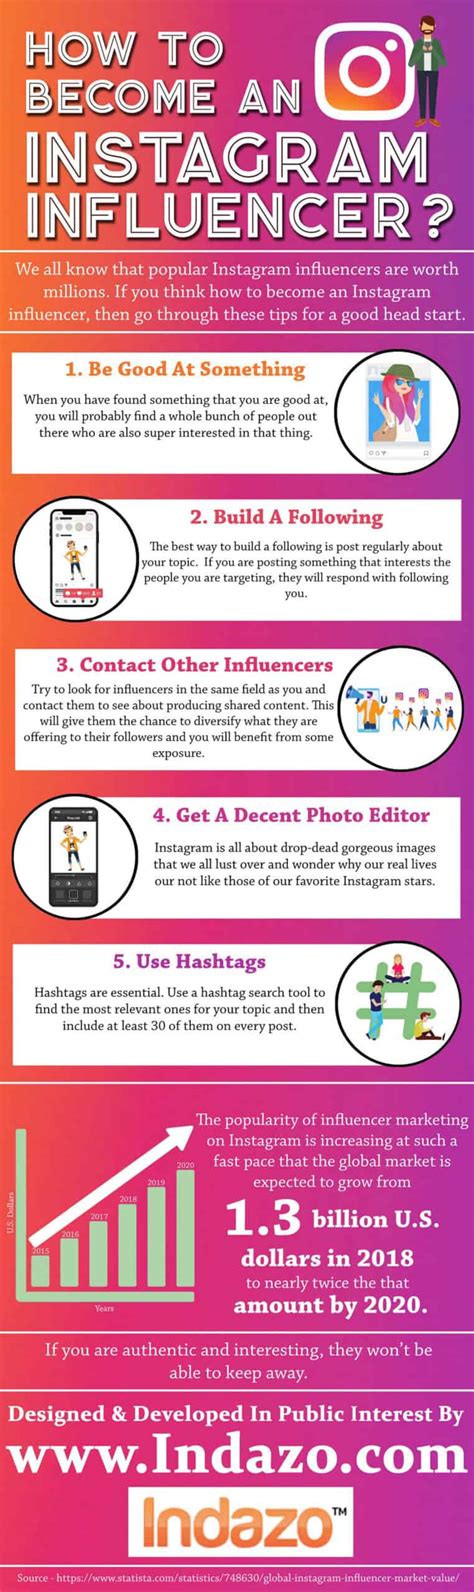 How to become an instagram influencer. Apr 11, 2018 · 9. Get in Touch With Brands. As you probably already know, you can become an Instagram influencer by working with brands you love. Once you have thousands of followers under your belt, you can start reaching out to brands. You can participate in their campaigns or use their brand-related hashtags in your posts. 